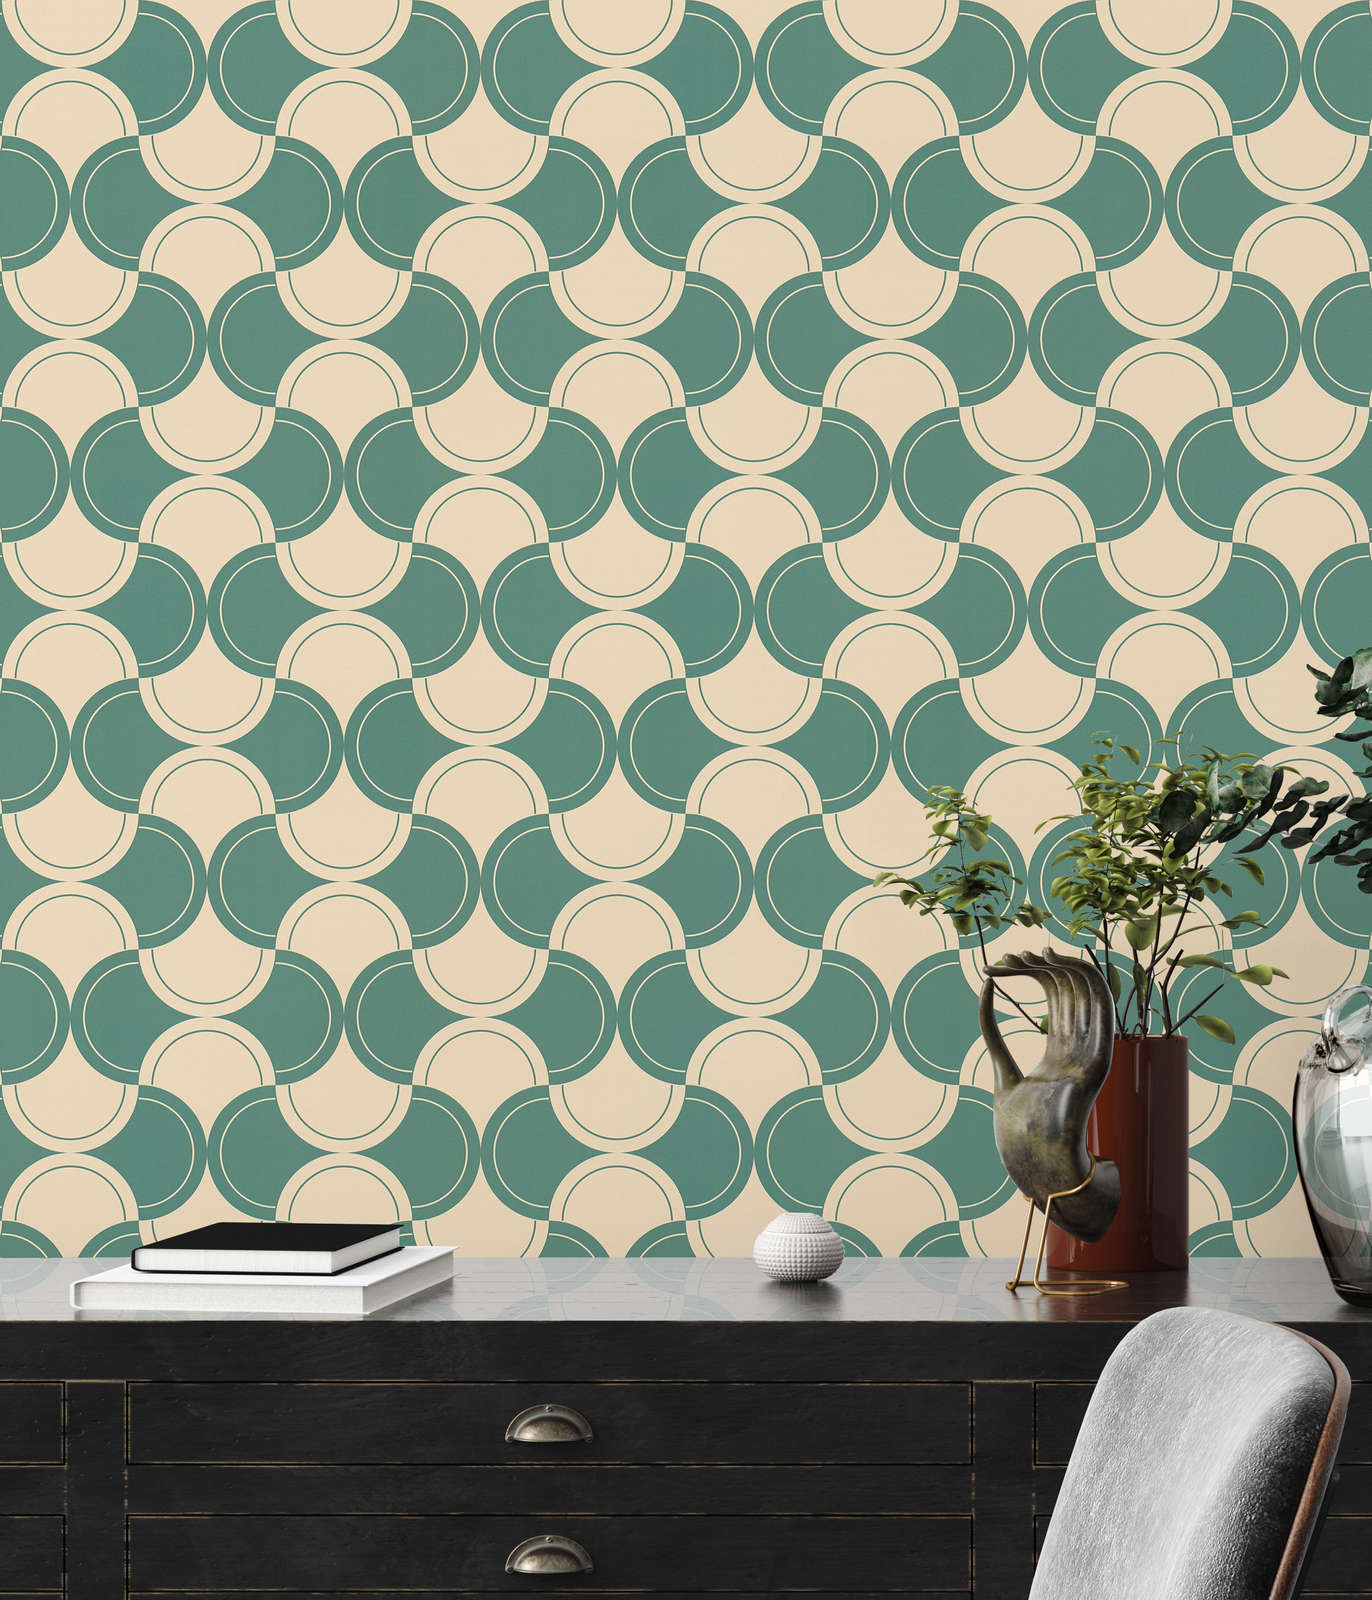             Non-woven wallpaper with semi-circle pattern in 70s style - green, beige
        